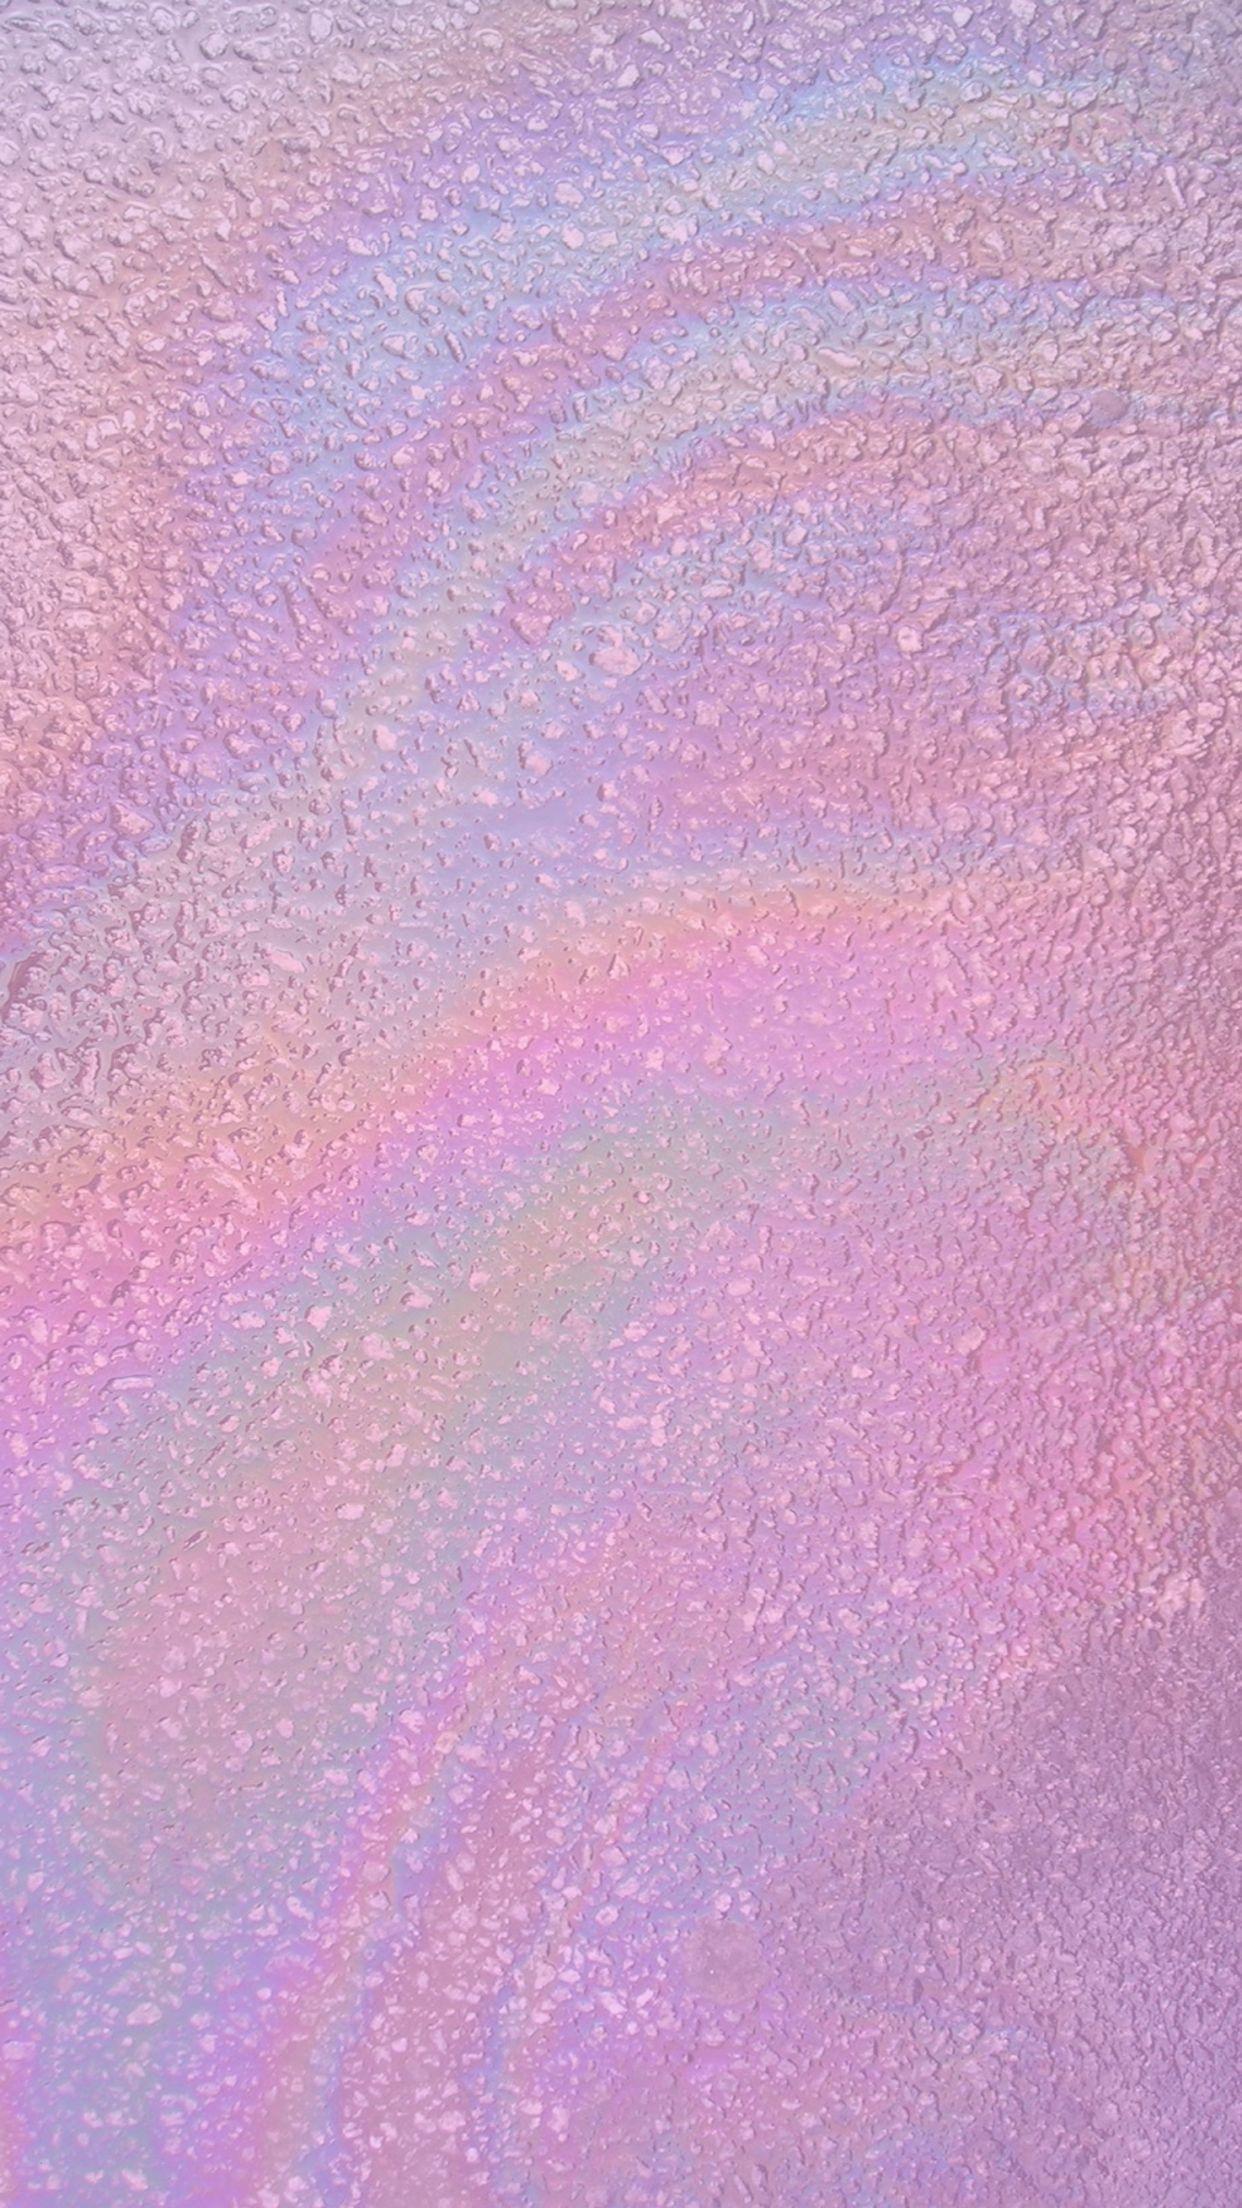 Wallpaper Cute Pastel Colorful Iridescent Holographic Wallpaper